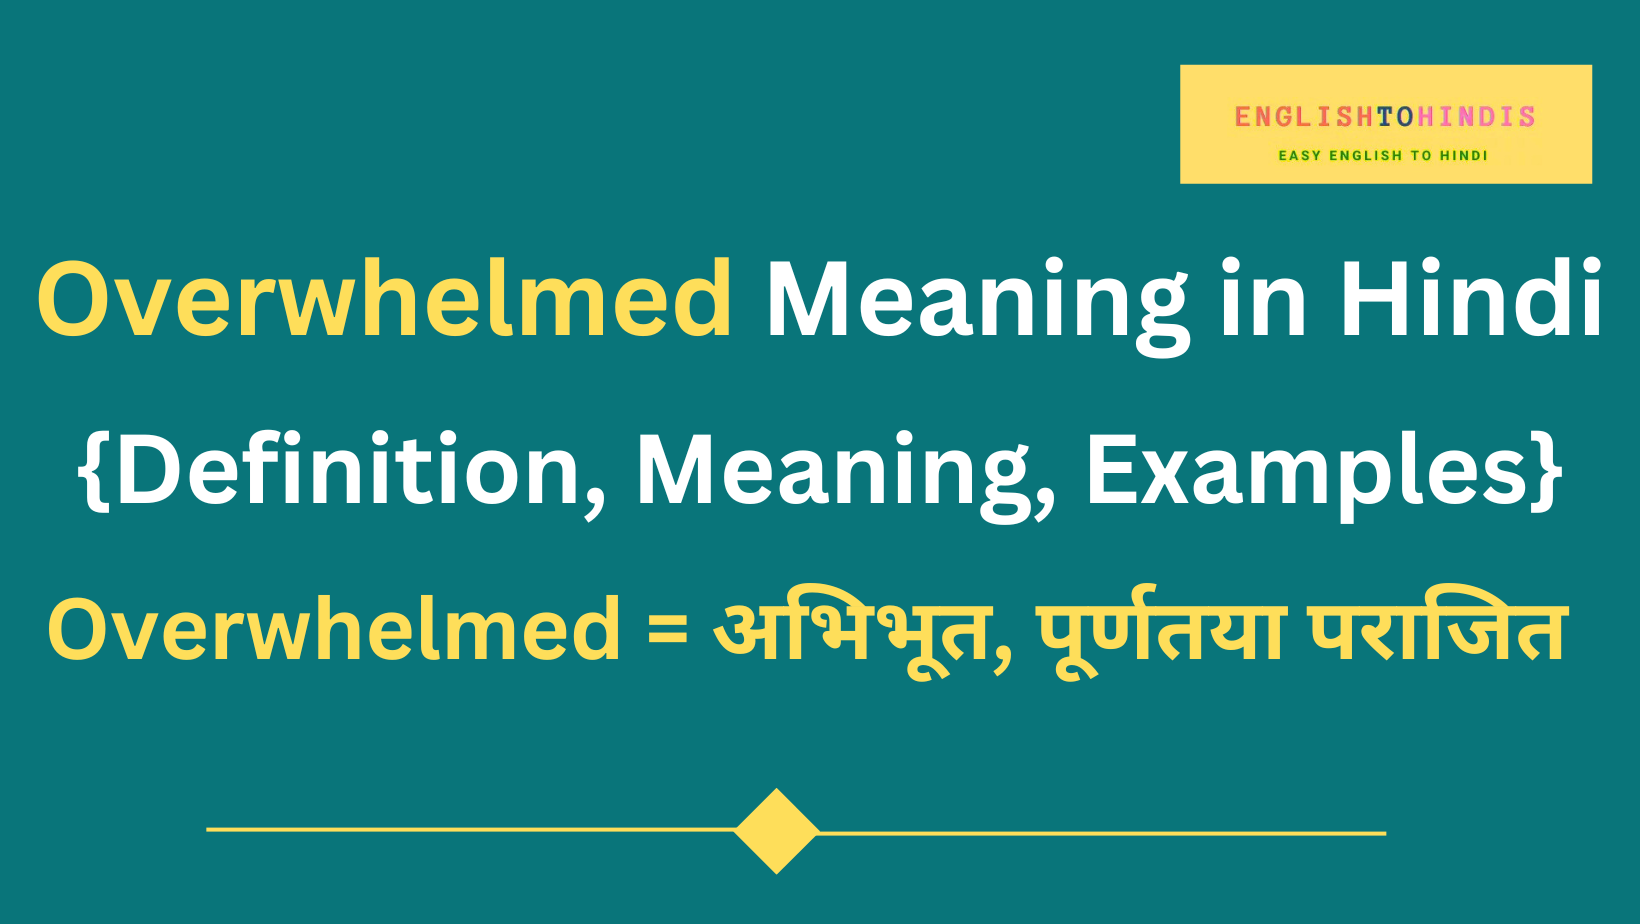 Overwhelmed Meaning in Hindi